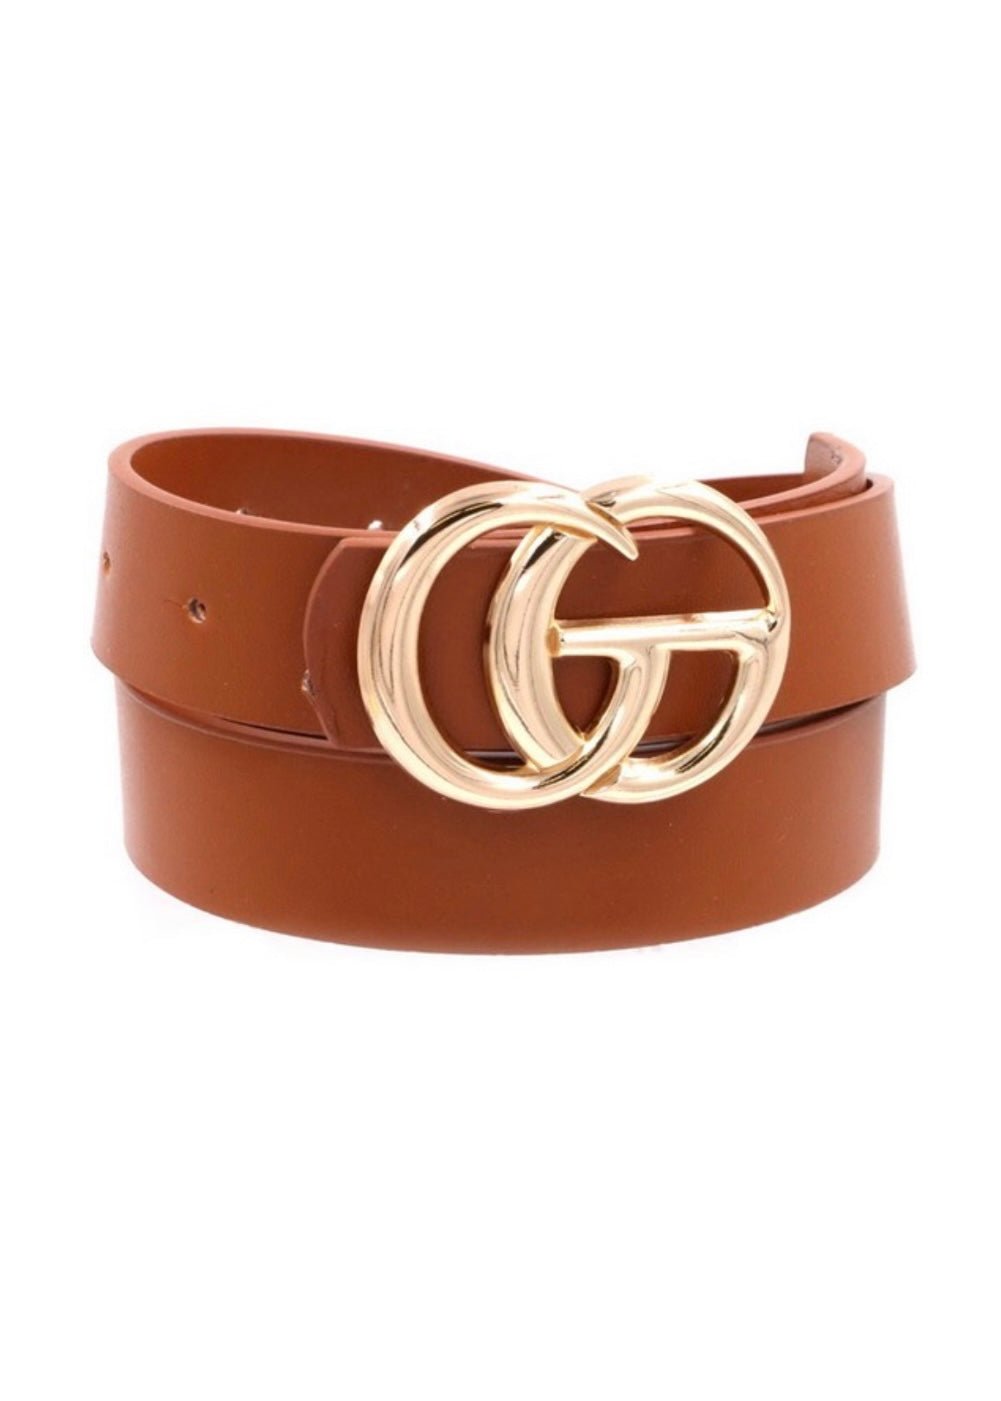 1" CG Faux Leather 40' Buckle Belt - Jimberly's Boutique